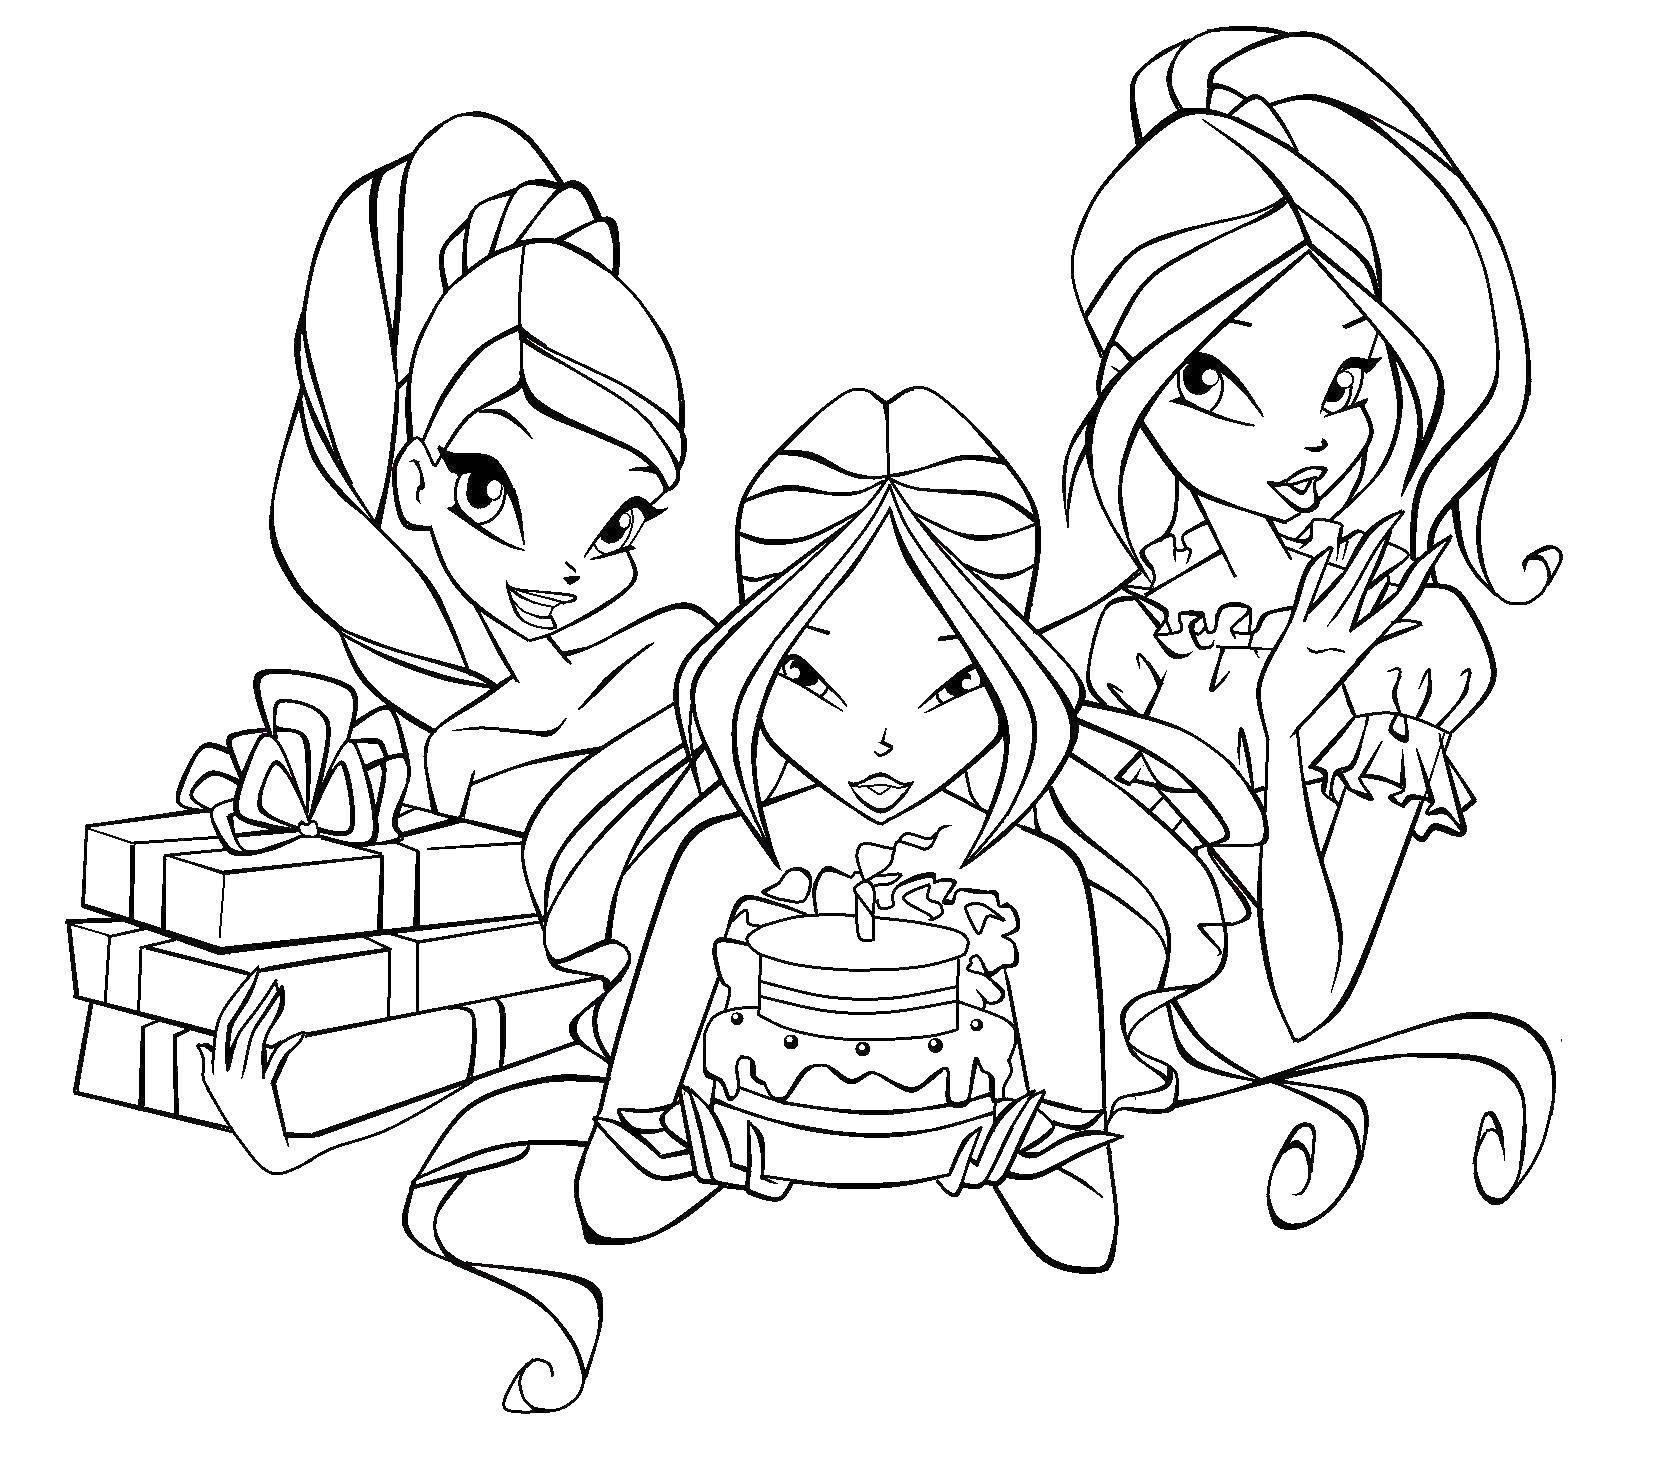 Coloring Stella, flora and bloom from winx cartoon. Category Winx. Tags:  Character cartoon, Winx.